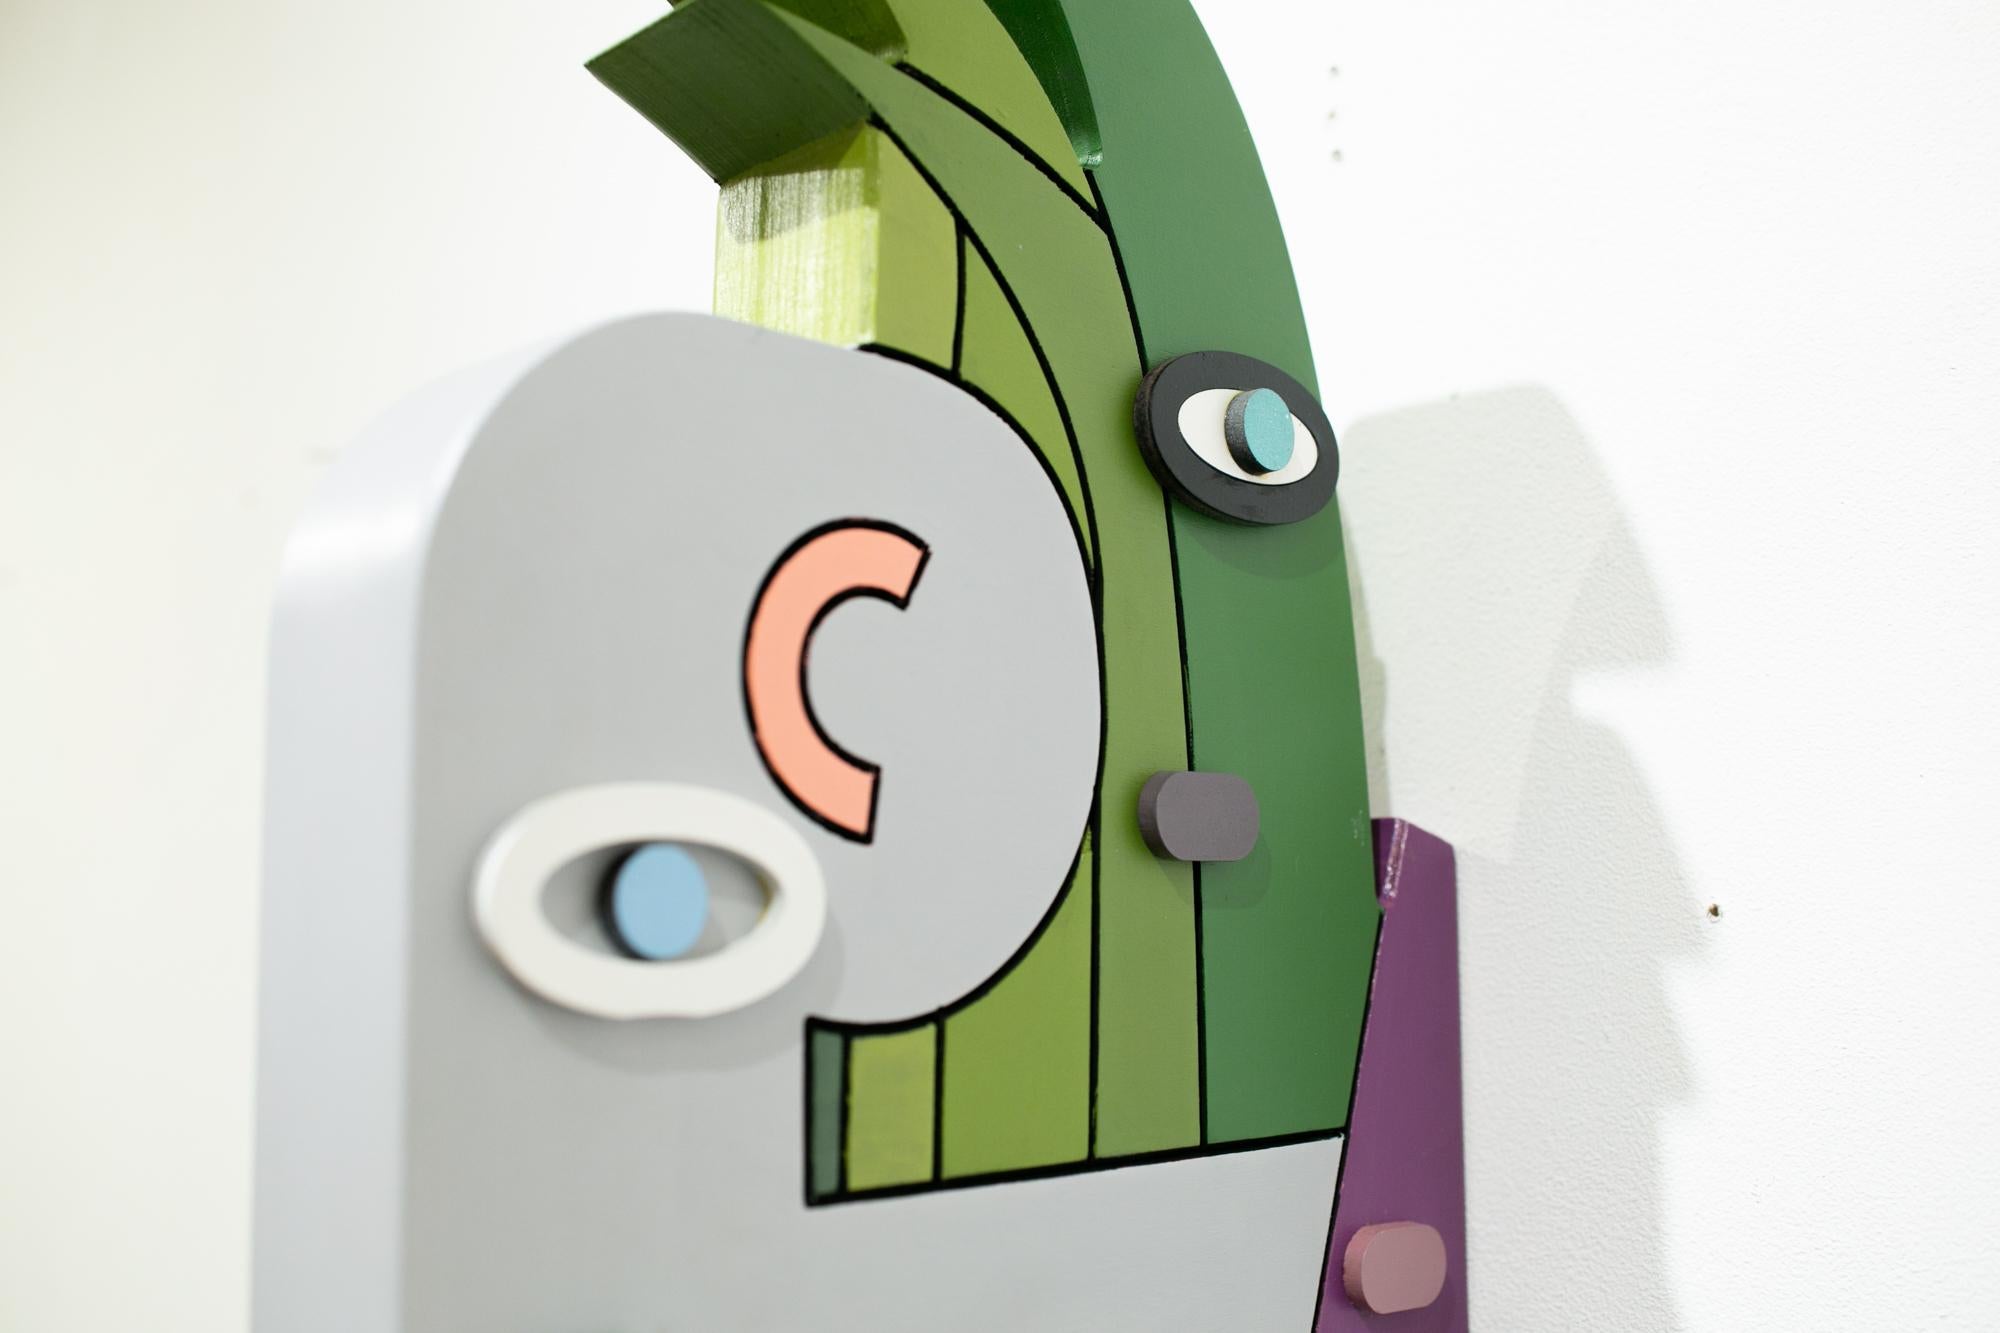 This green, purple, and grey wall-hanging abstract sculpture titled 